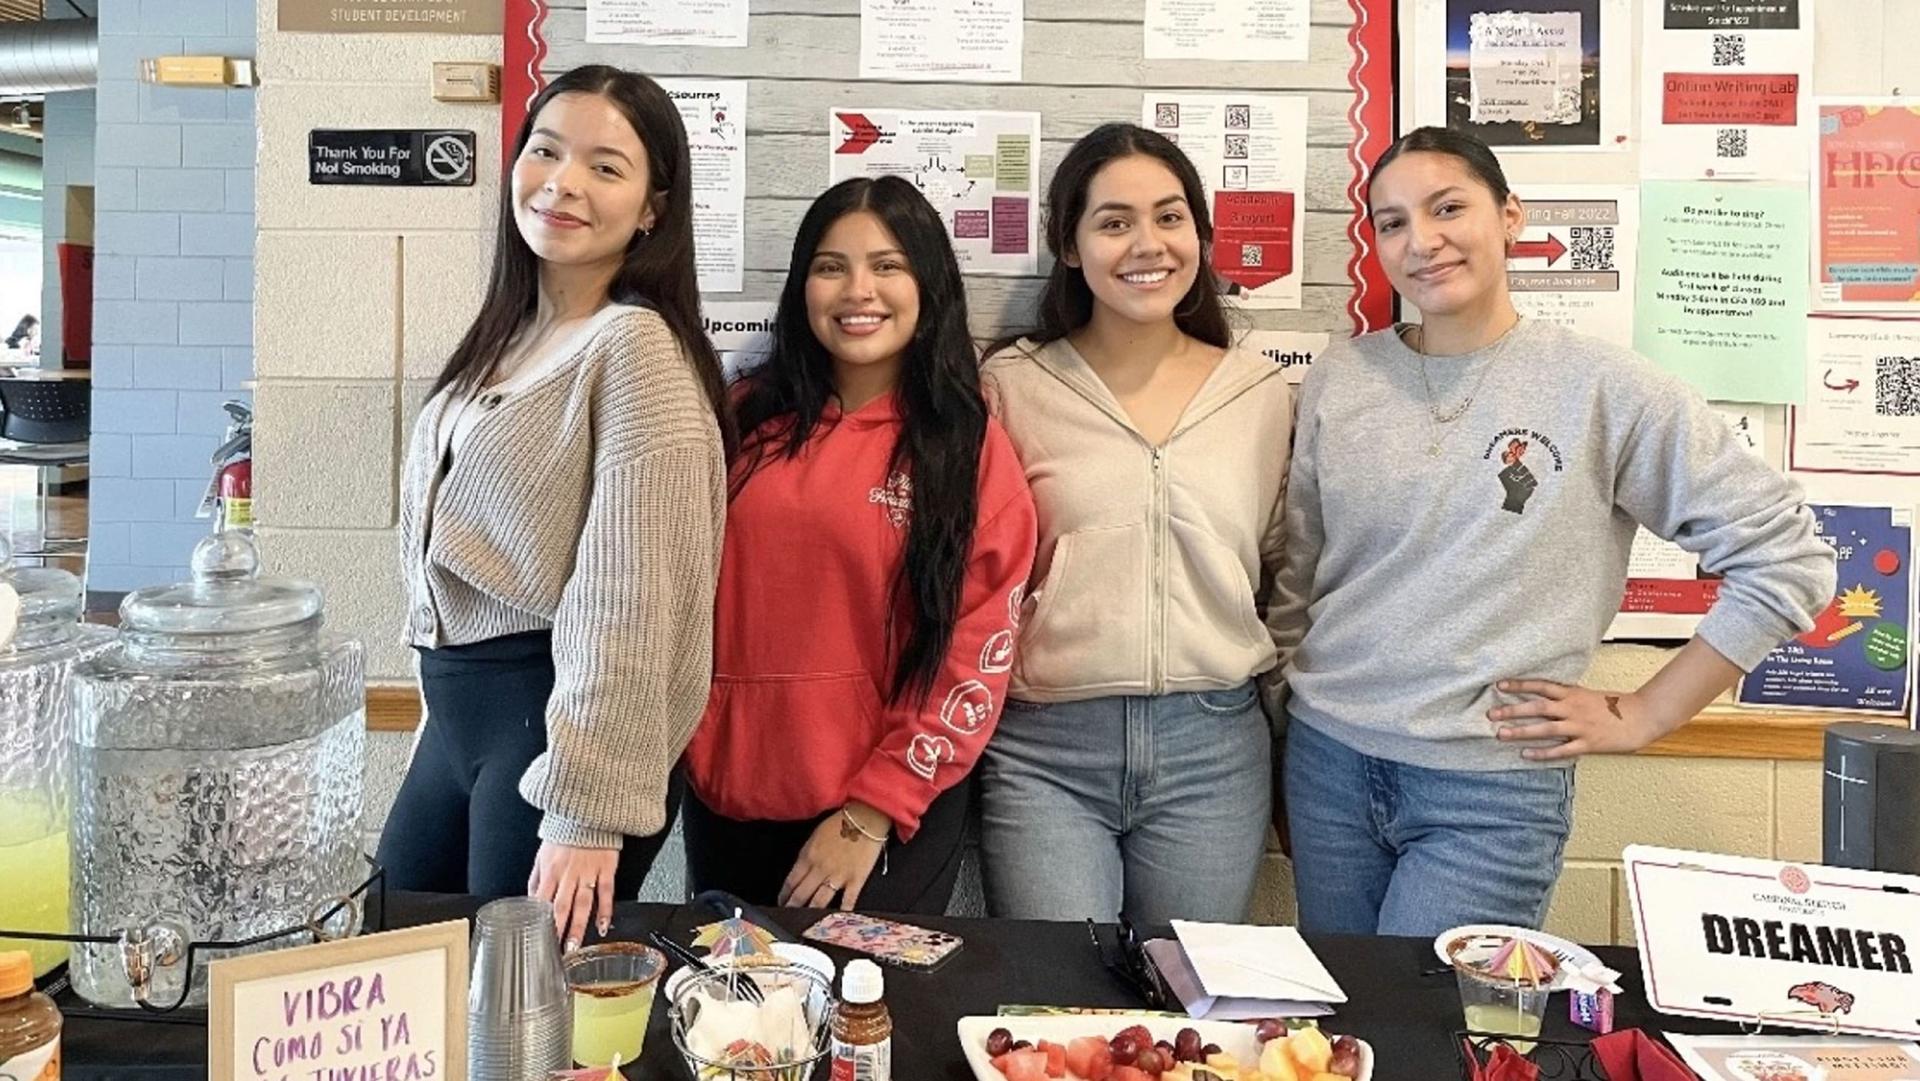 From left to right: Maria Perez, Vania Davina, Hulyana Rodriguez and Yareli Suarez were members of Dreamers Welcome, a student organization at Cardinal Stritch University.